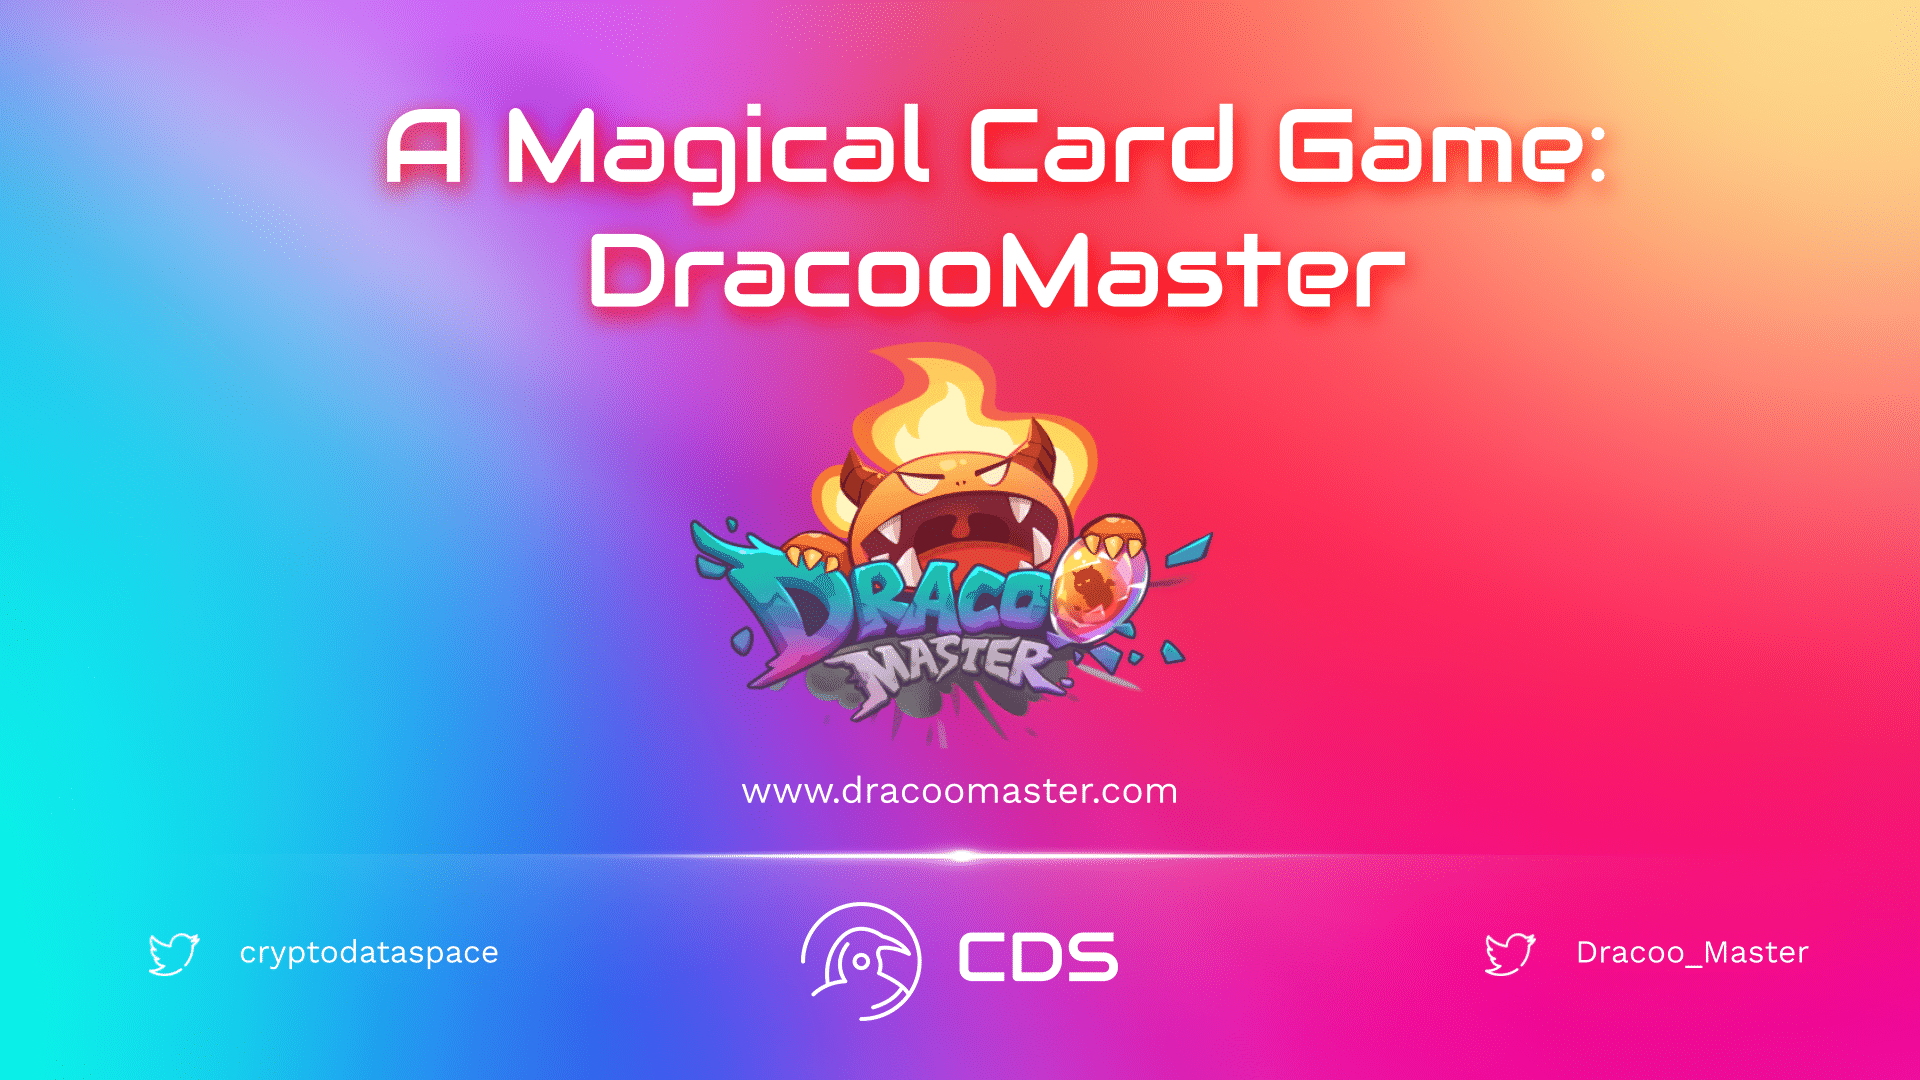 A Magical Card Game: DracooMaster